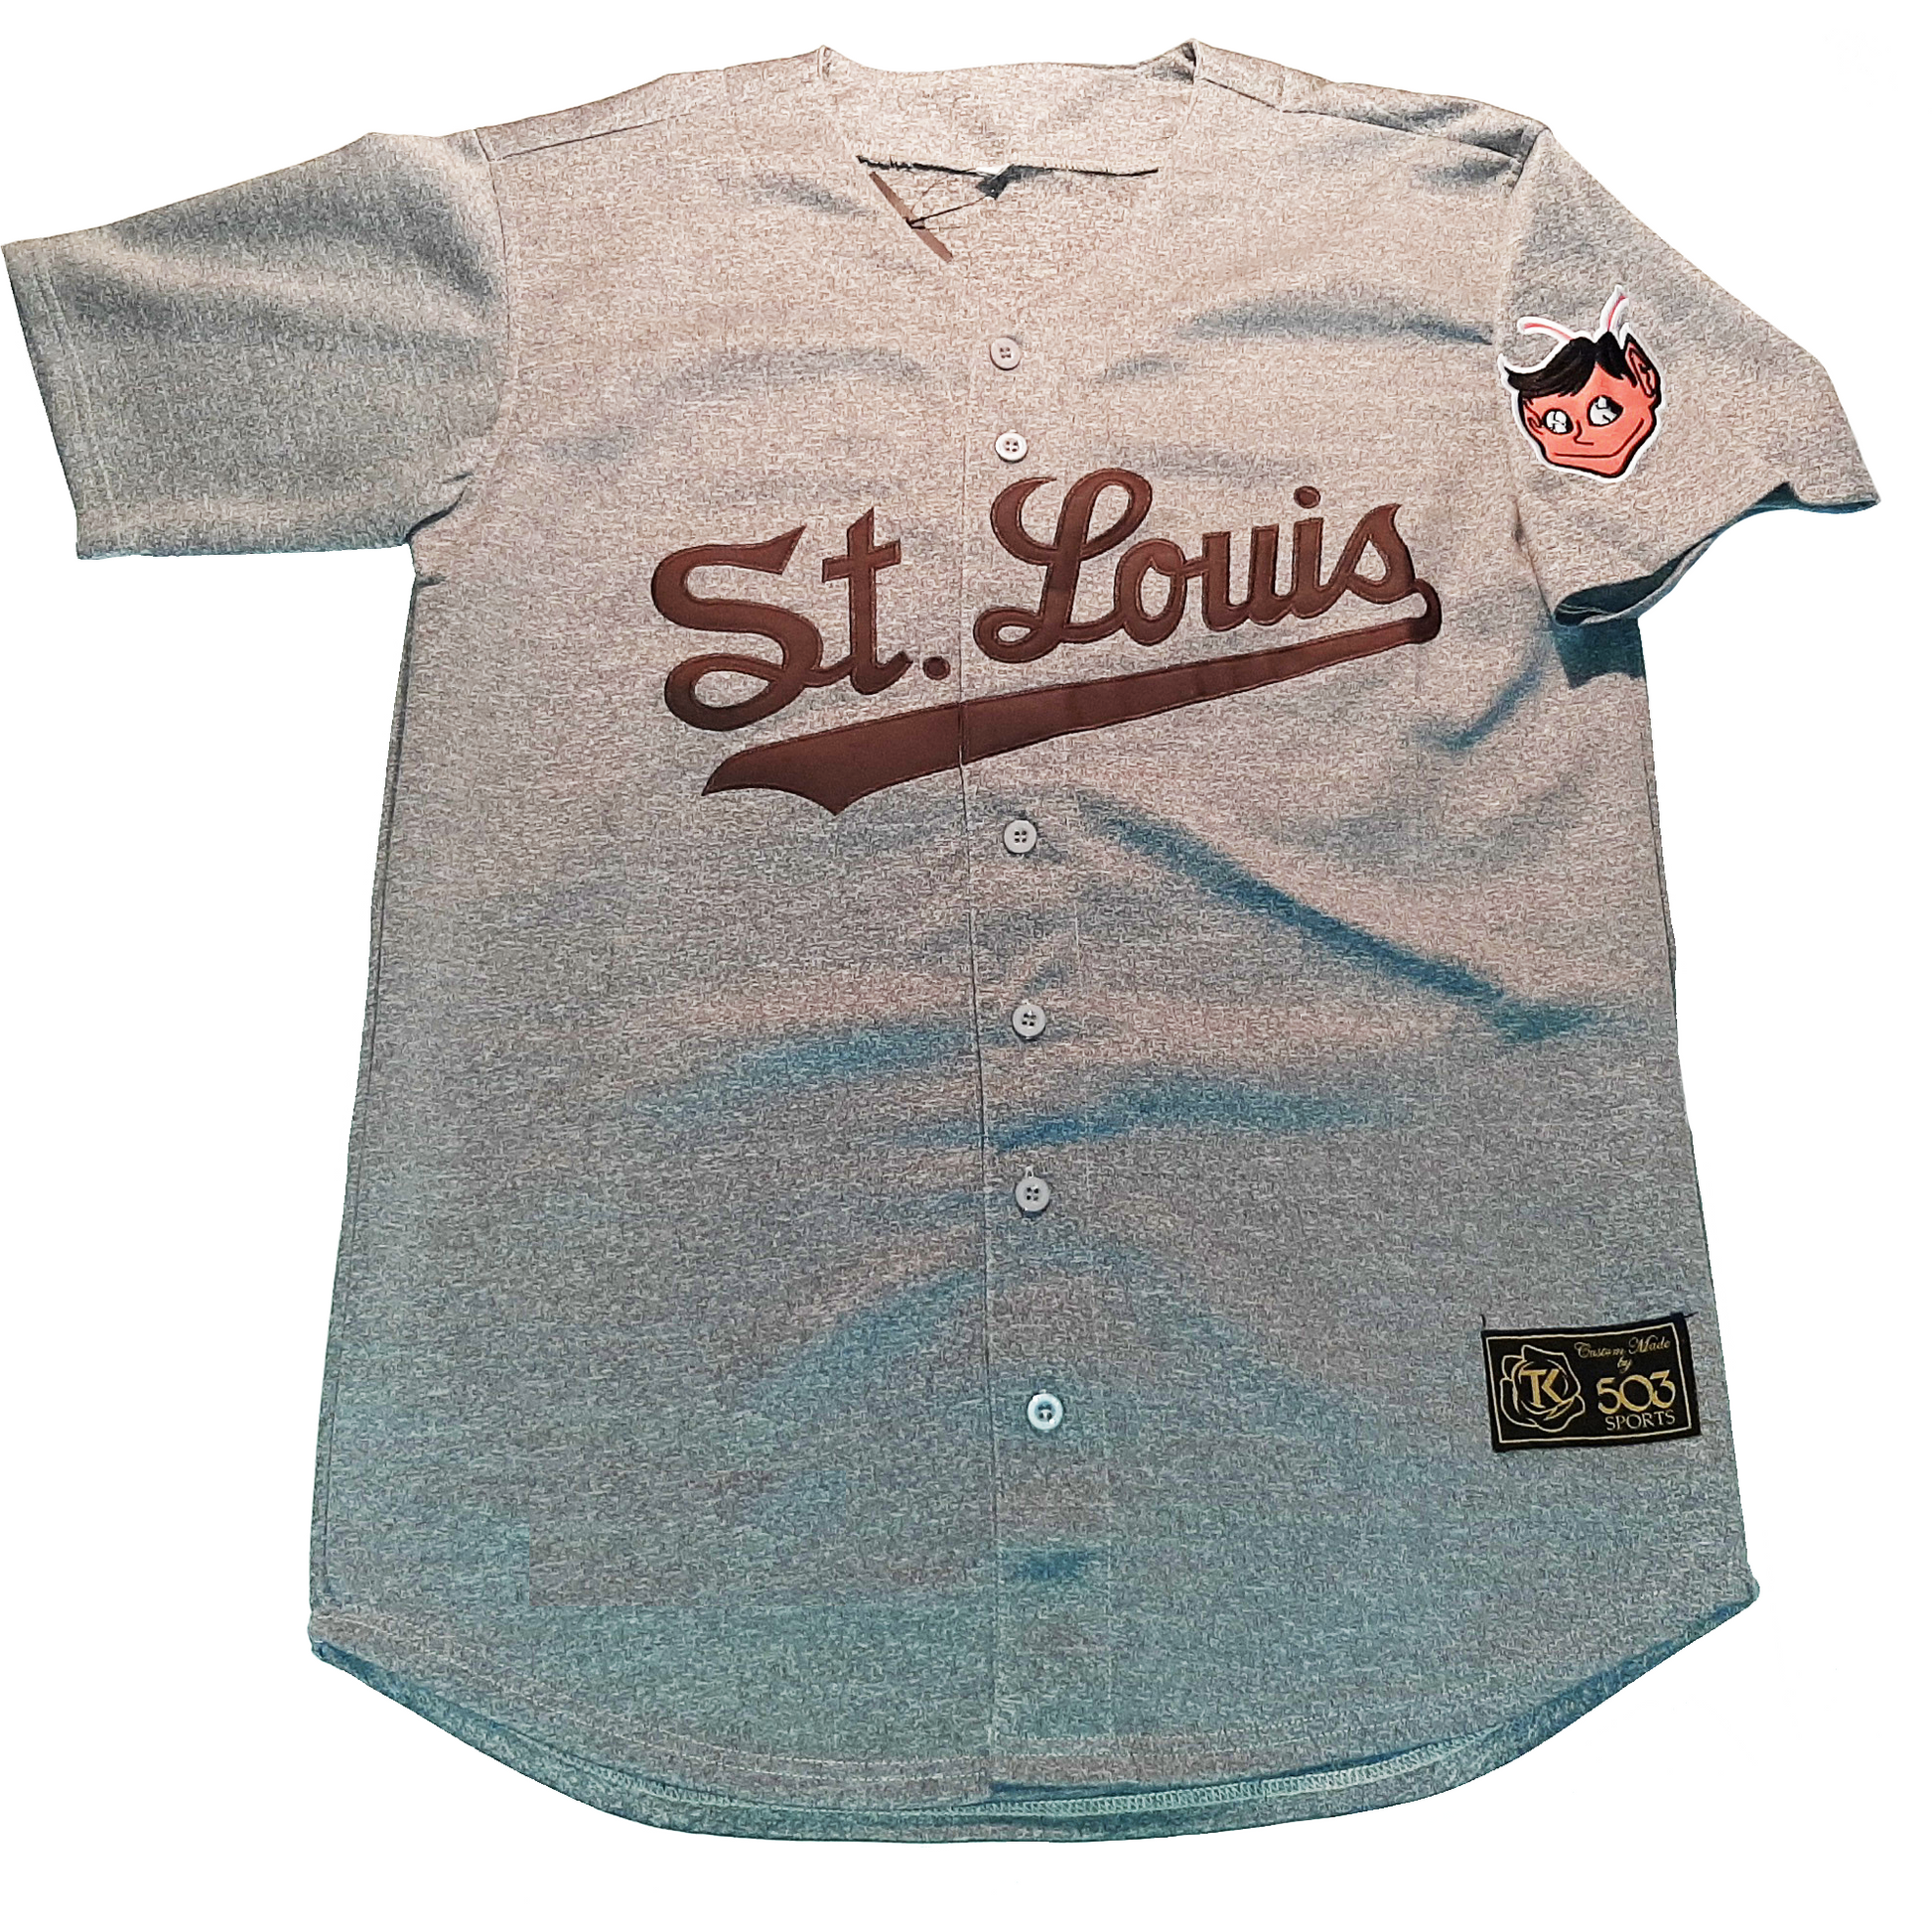 Satchel Paige St Louis Browns Jersey #29 Mitchell & Ness Throwback